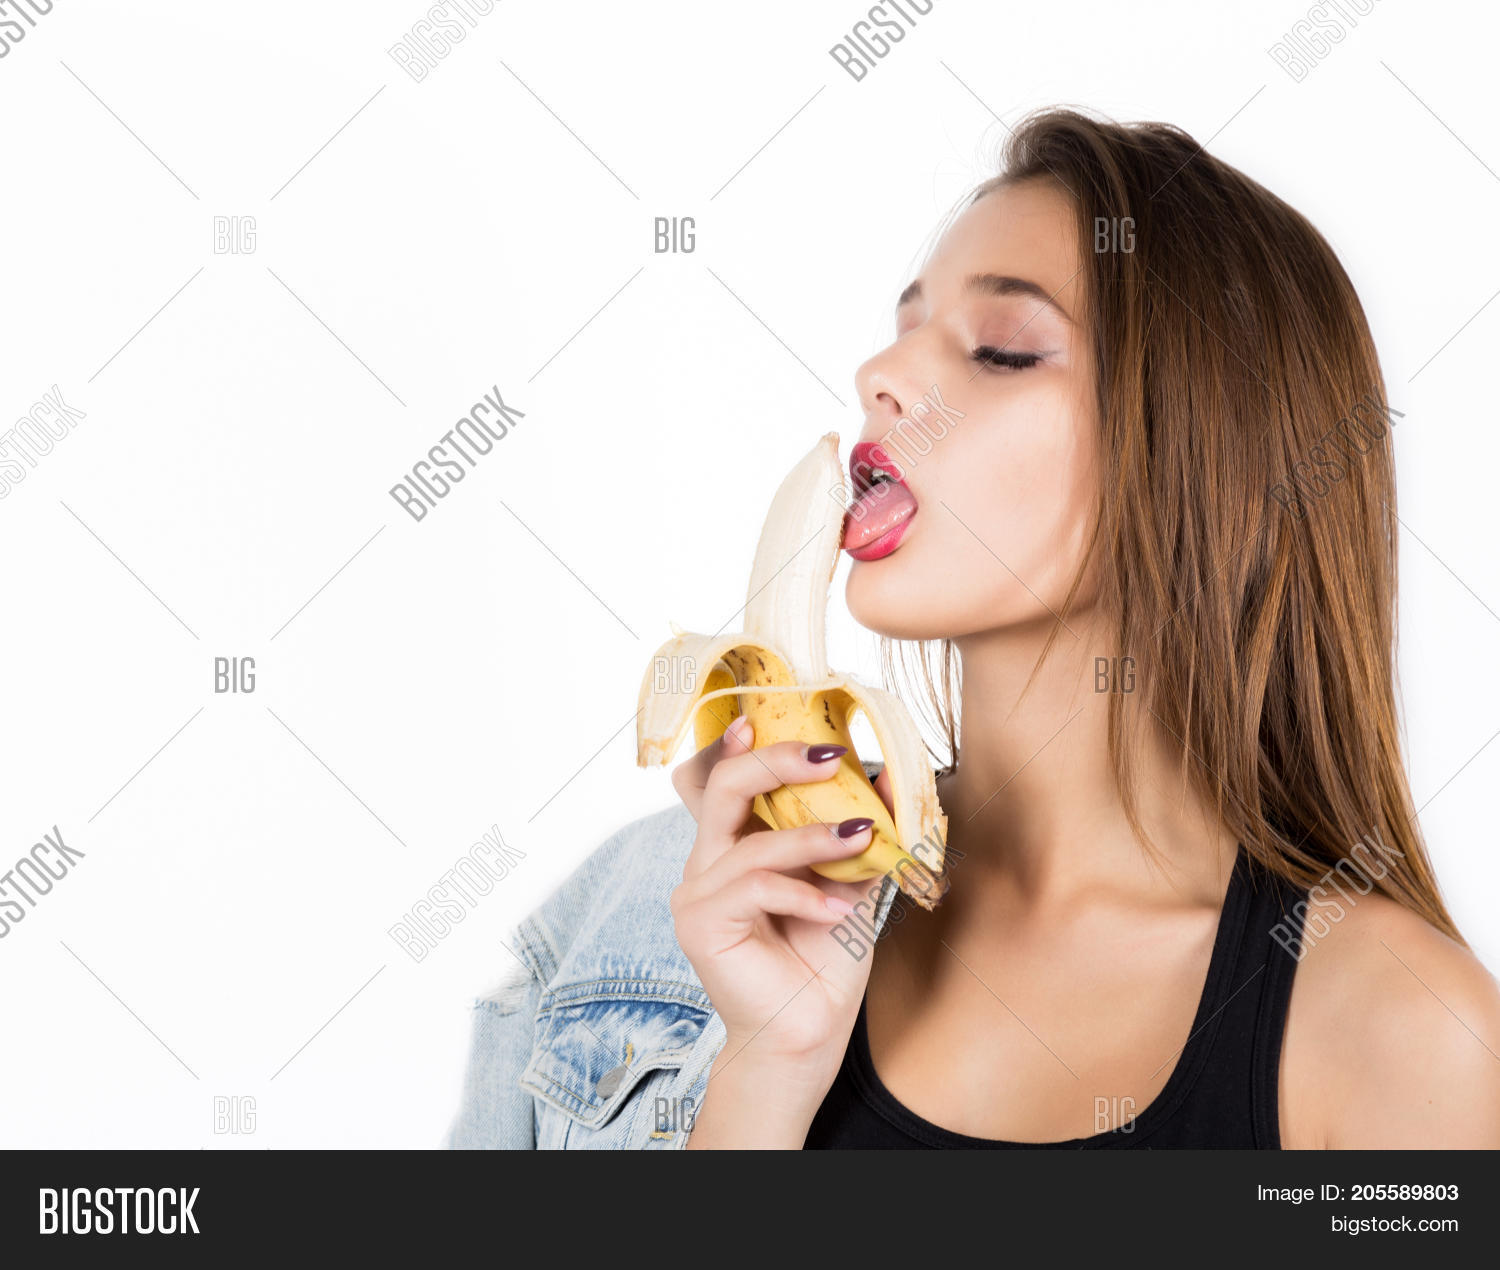 alissa lawson recommends Woman Eating Banana Picture